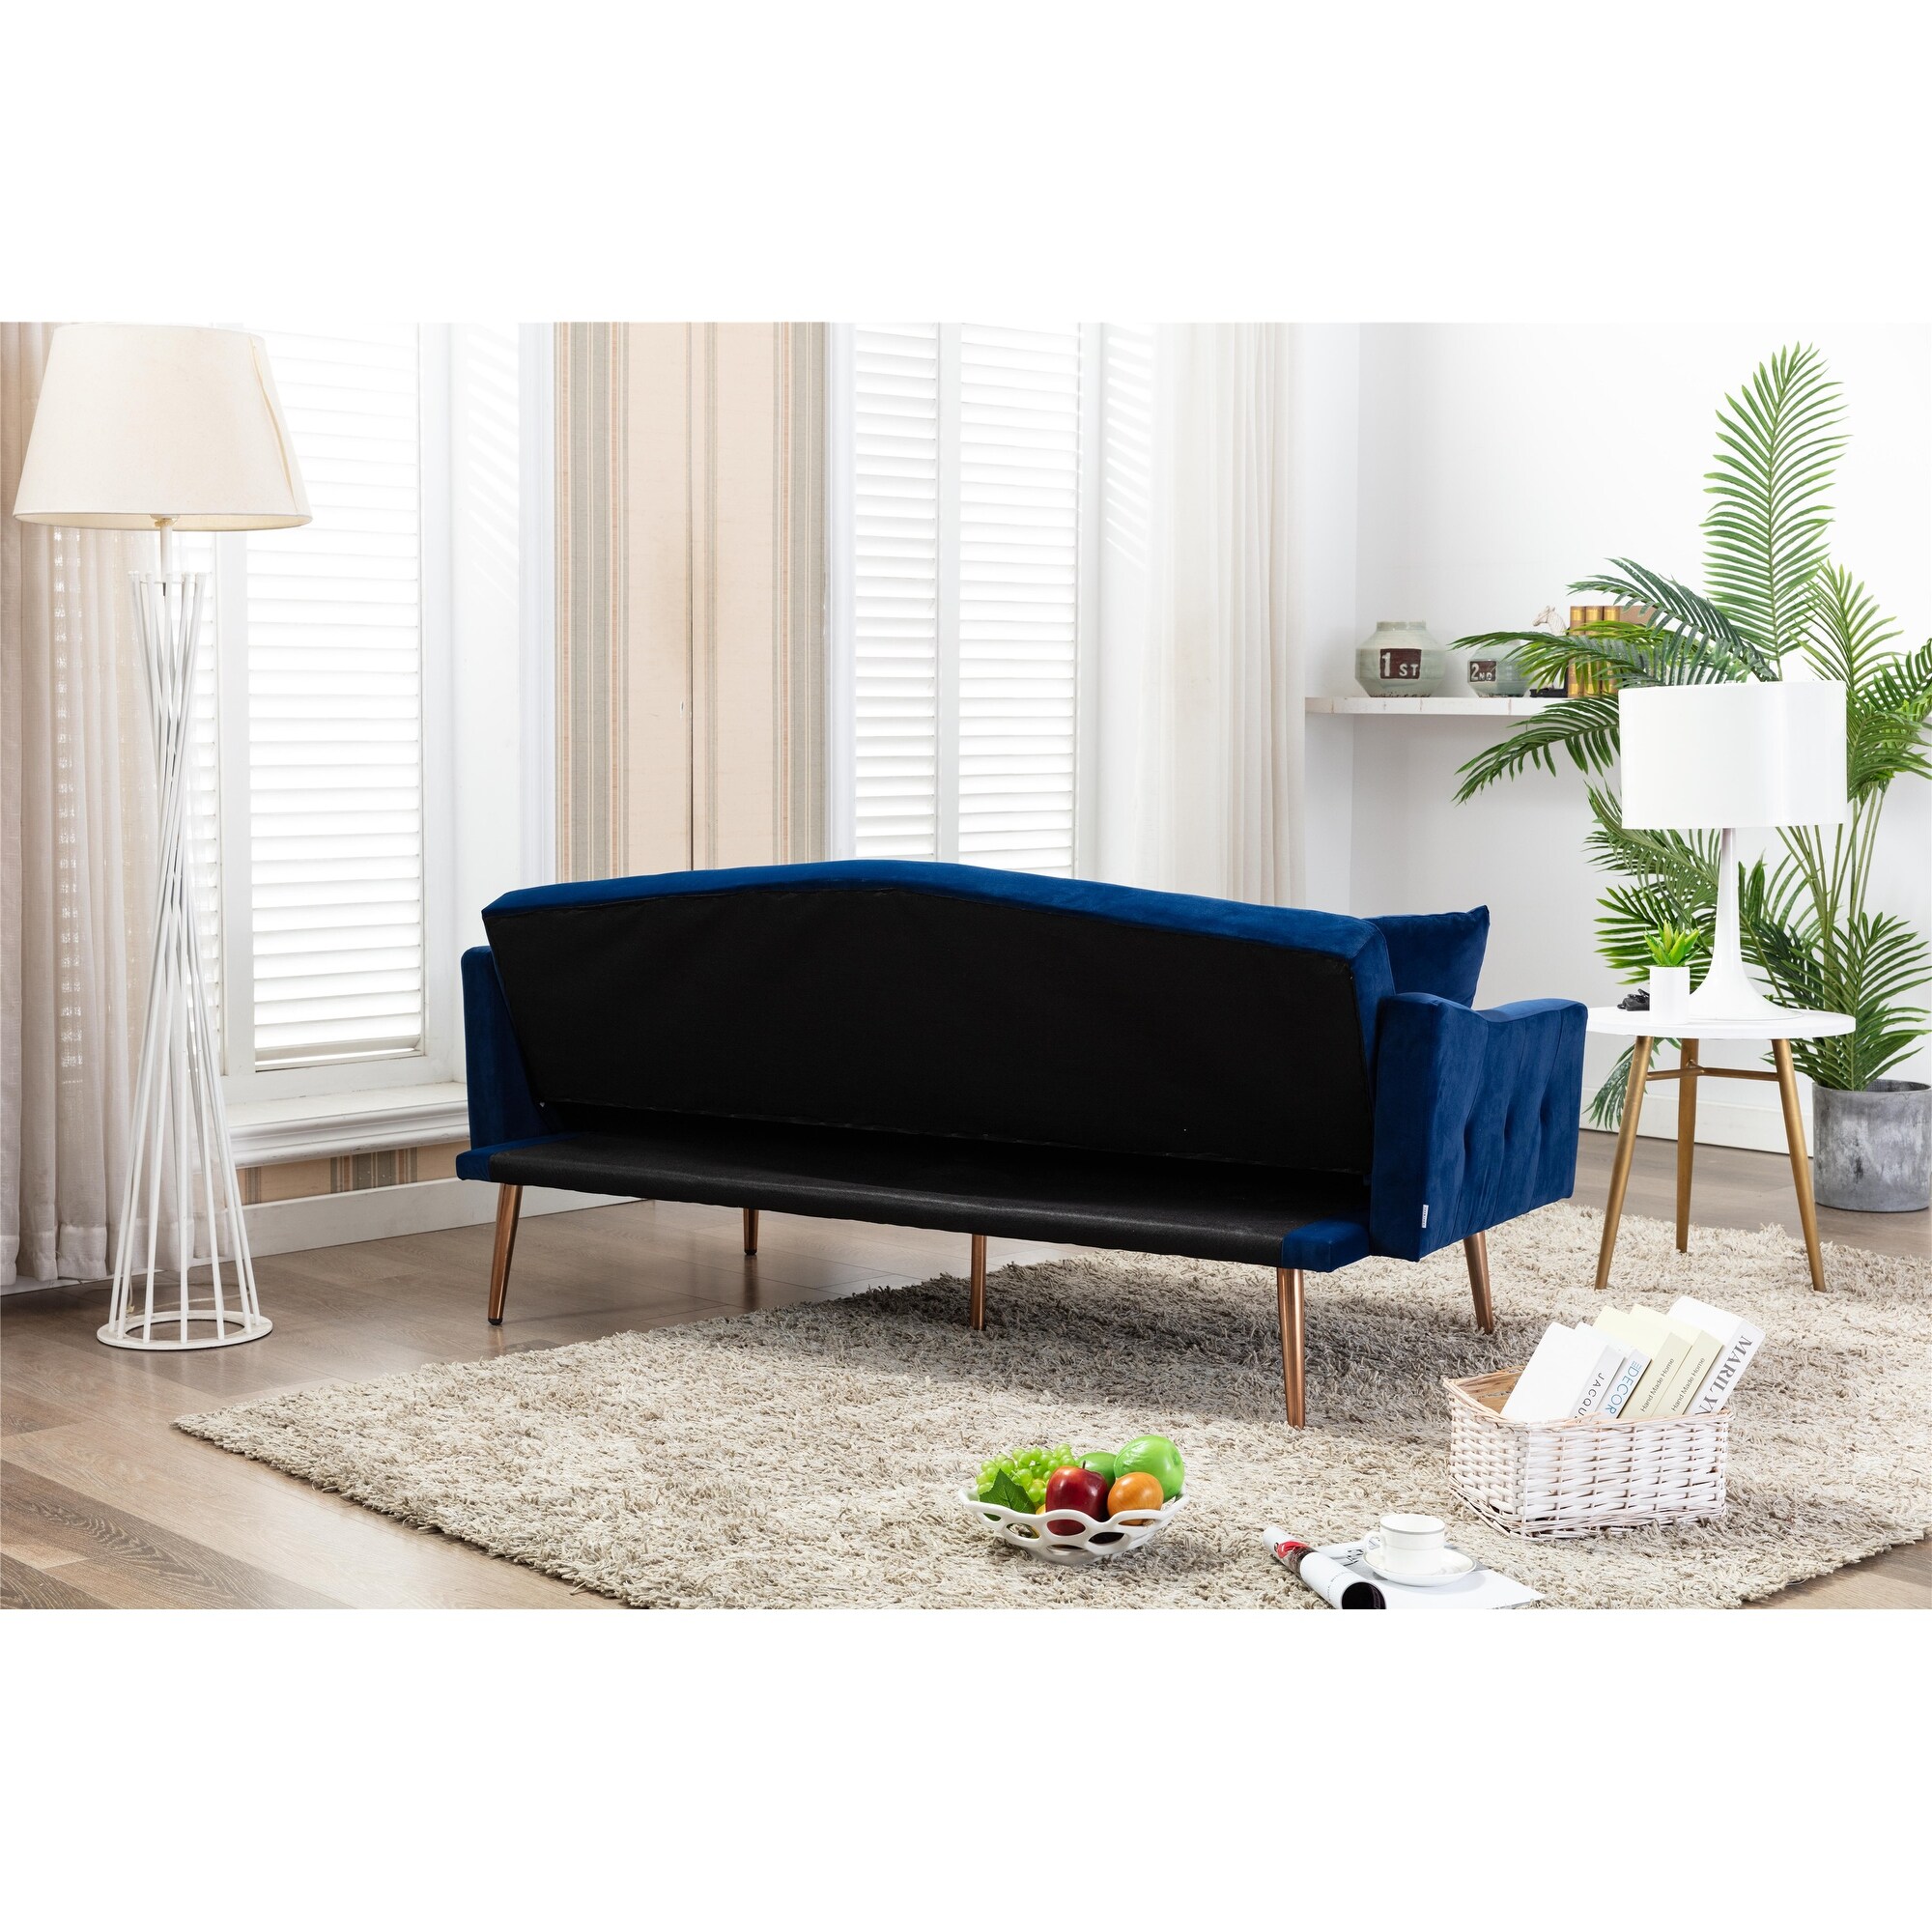 Navy Tufted Cushions Velvet Sofa, Accent Sofa, Loveseat Sofa with Stainless Feet Black Velvet, Converted Into a Sofa Bed